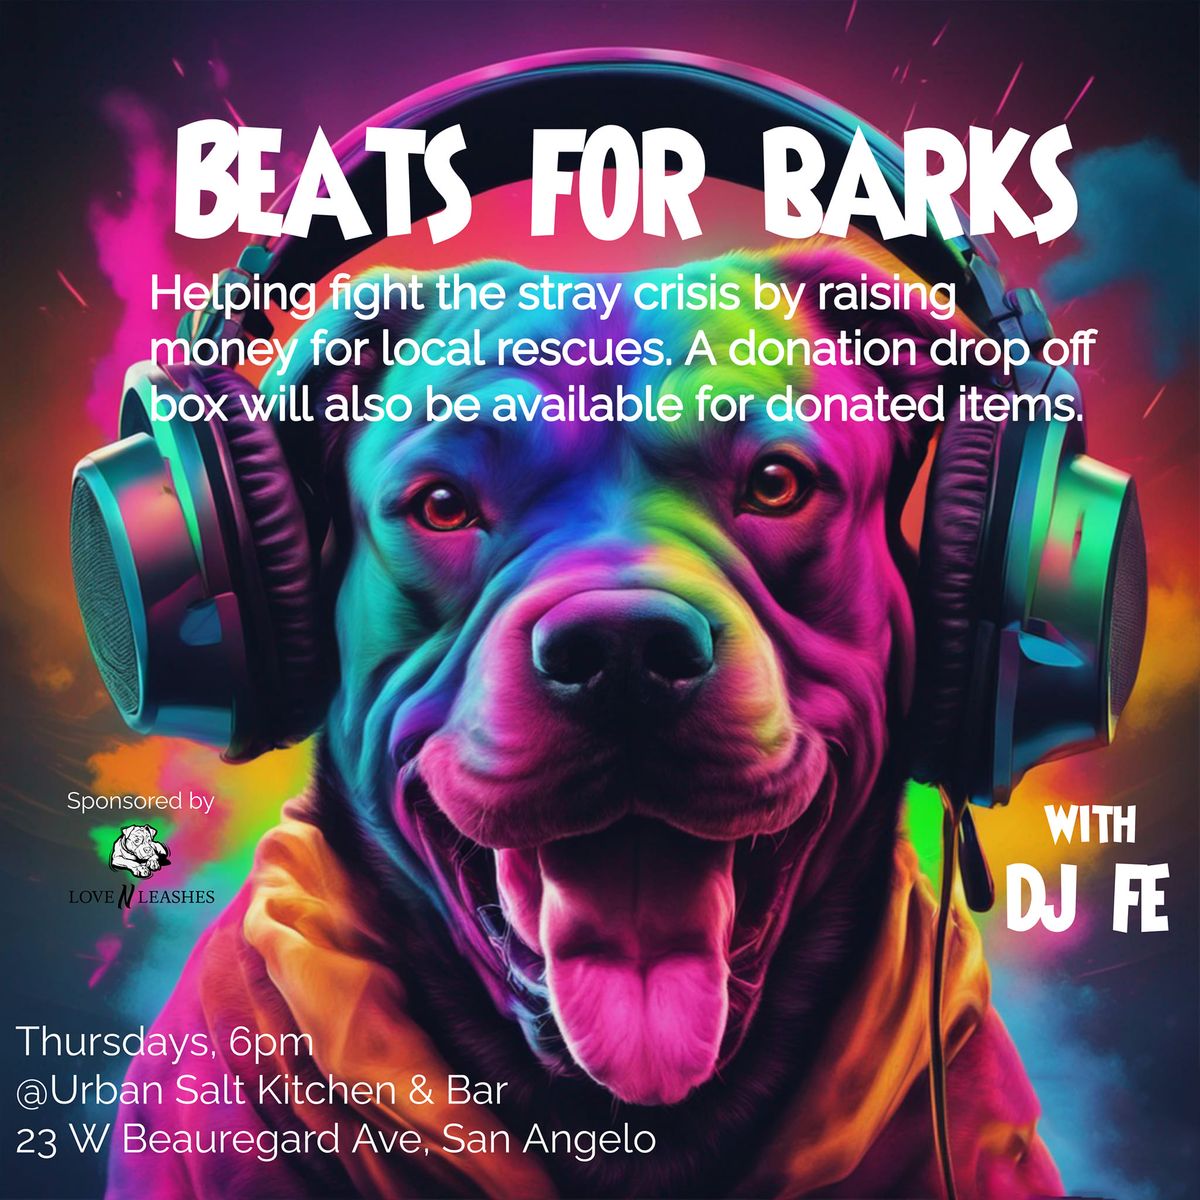 Beats for Barks